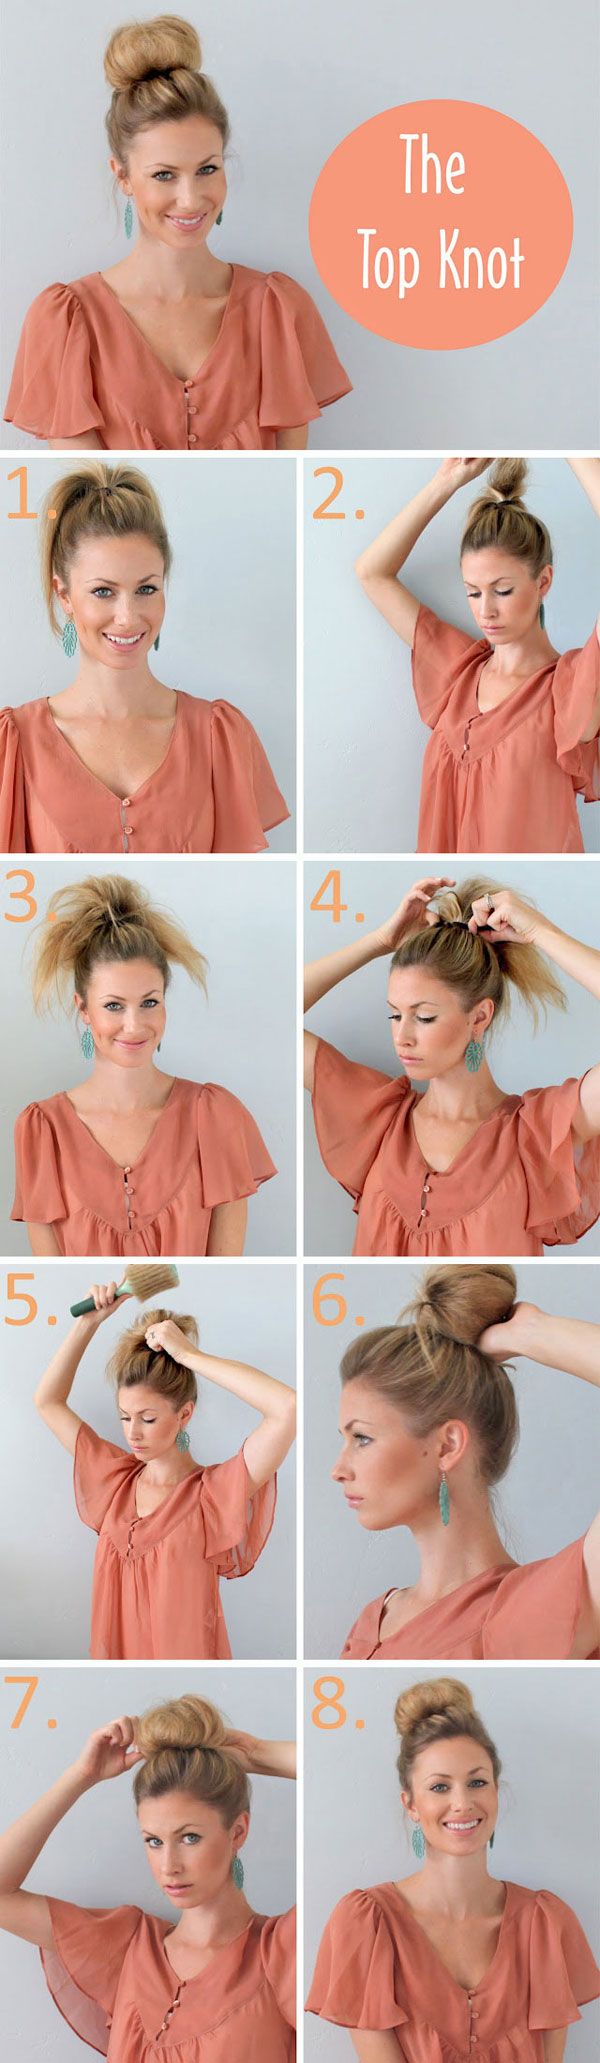 Tickled topknot